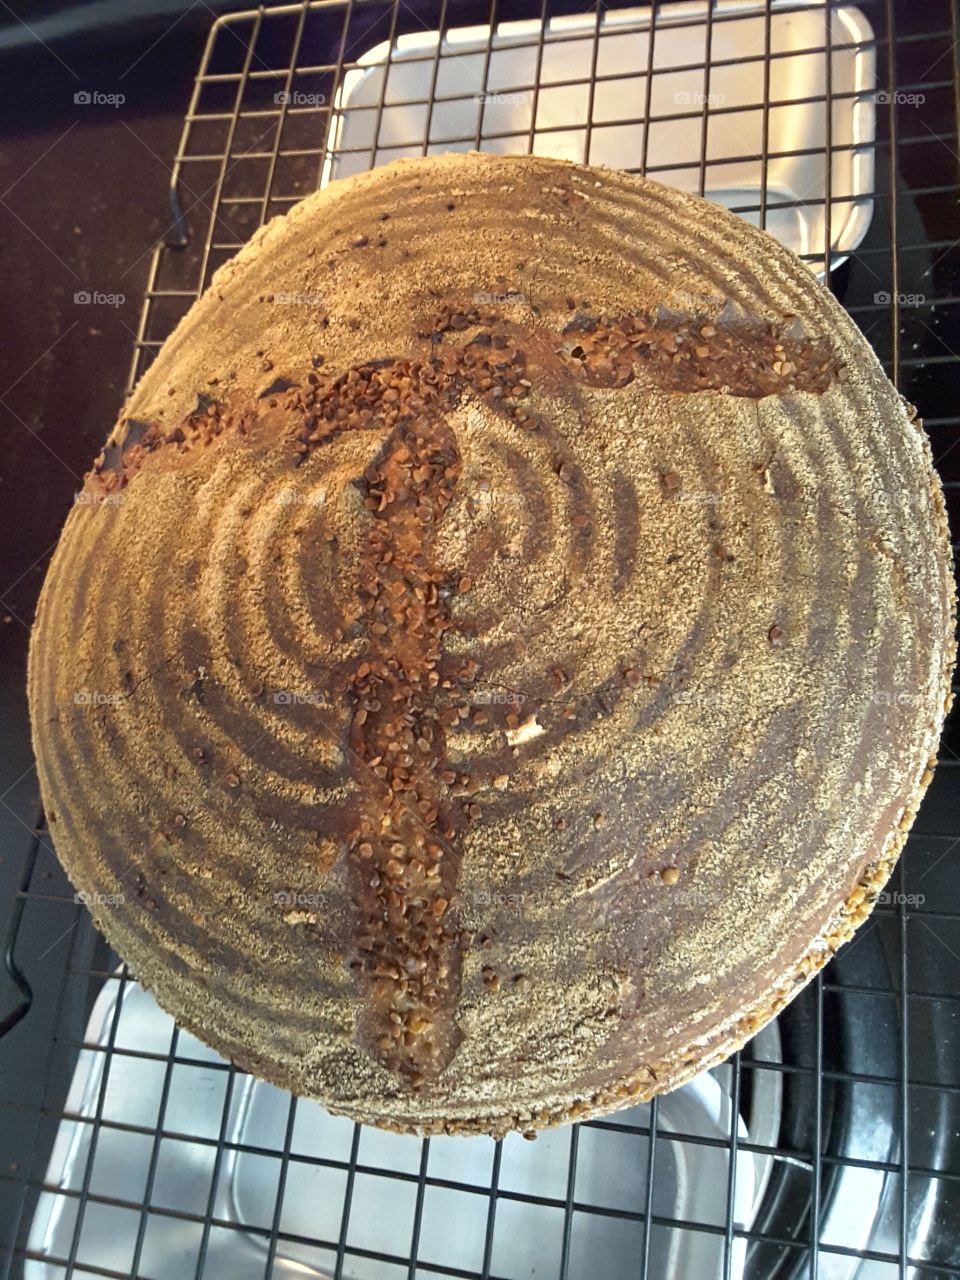 Homemade Sourdough bread on fathers day